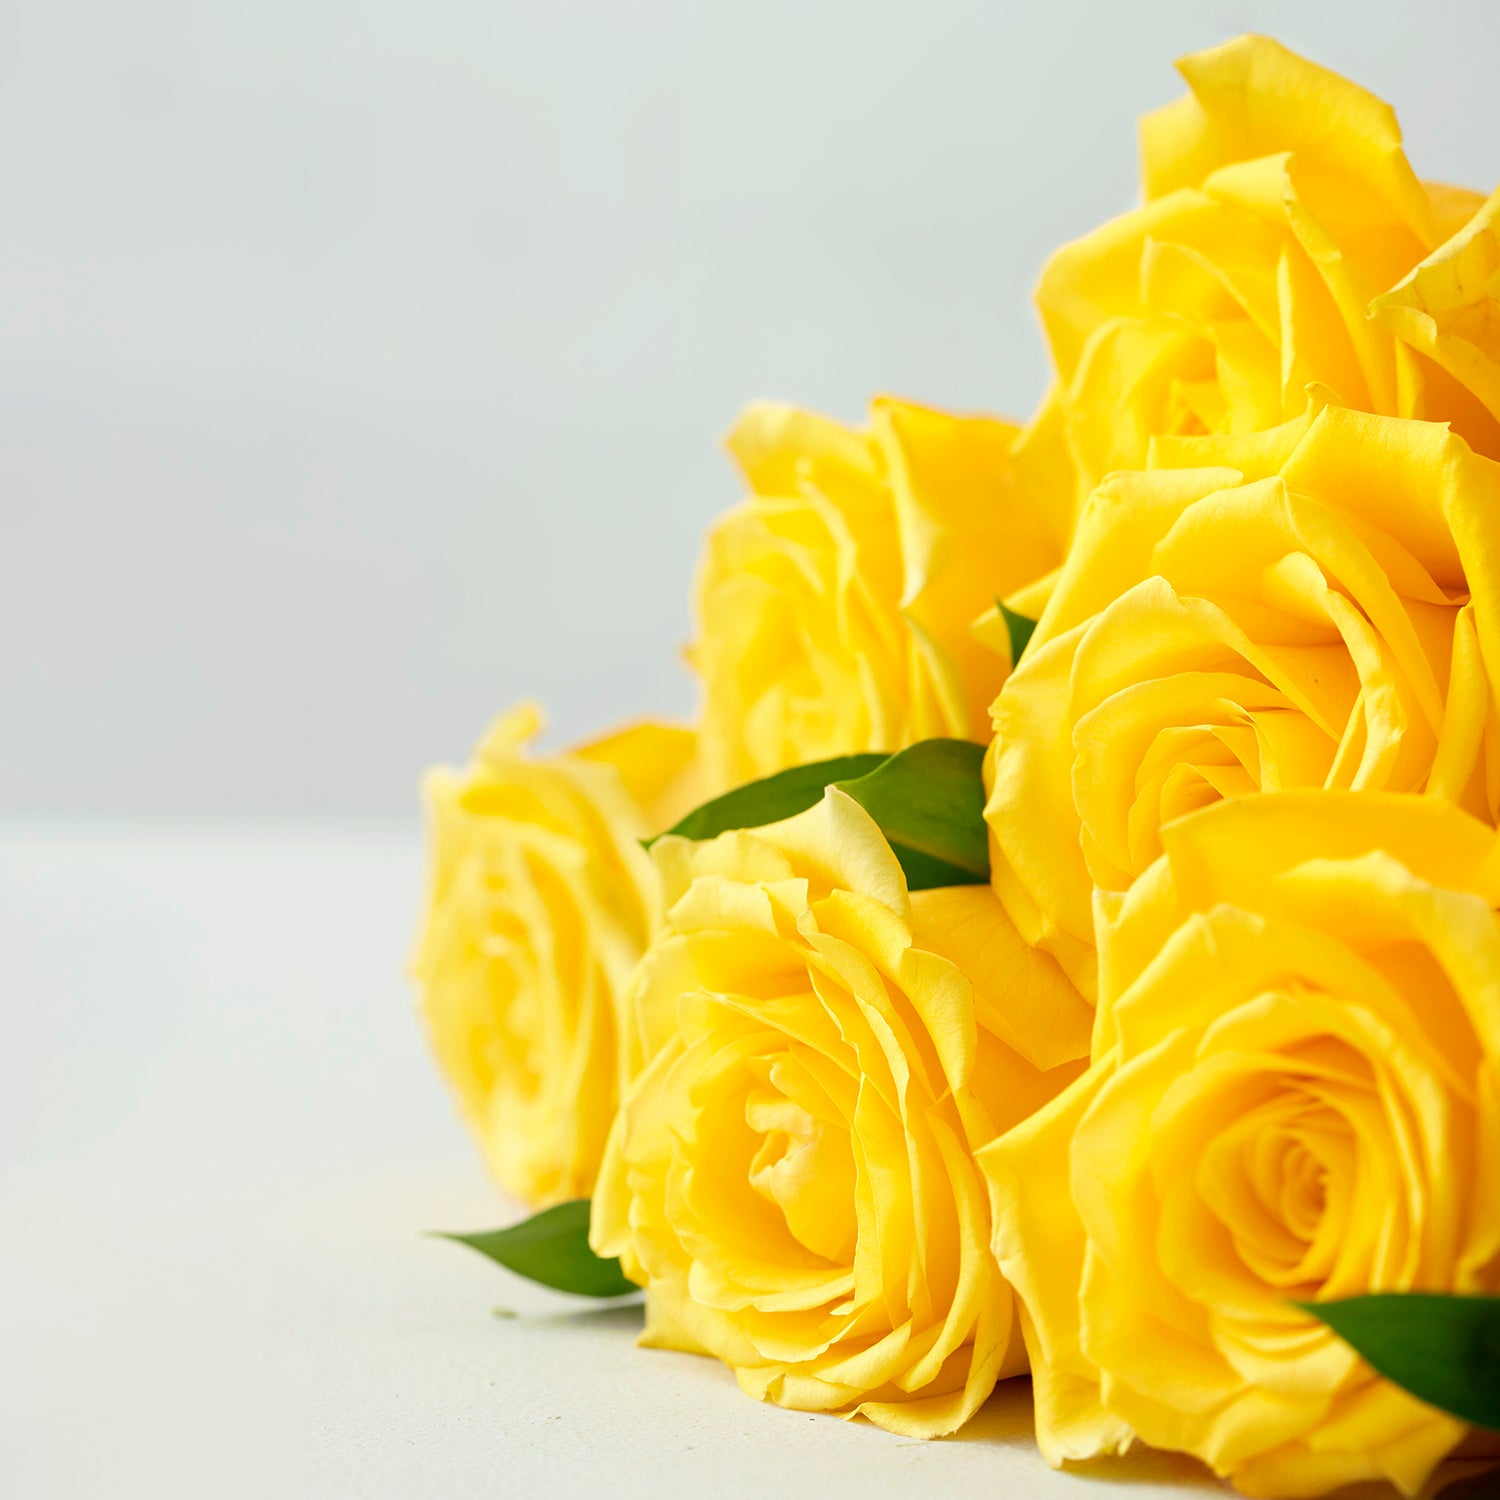 Closeup of five yellow roses on white background.